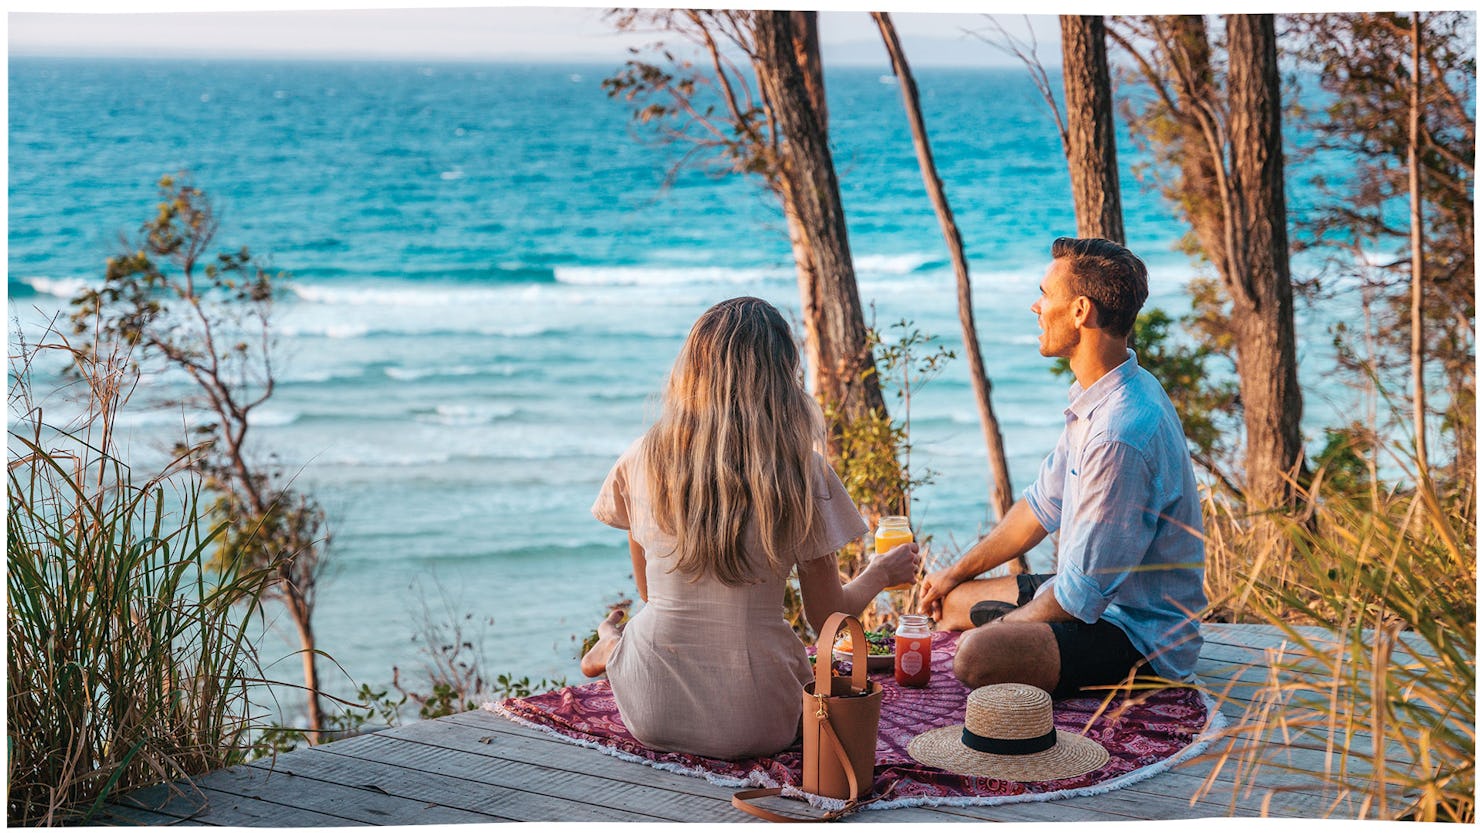 Picnic in Noosa National Park